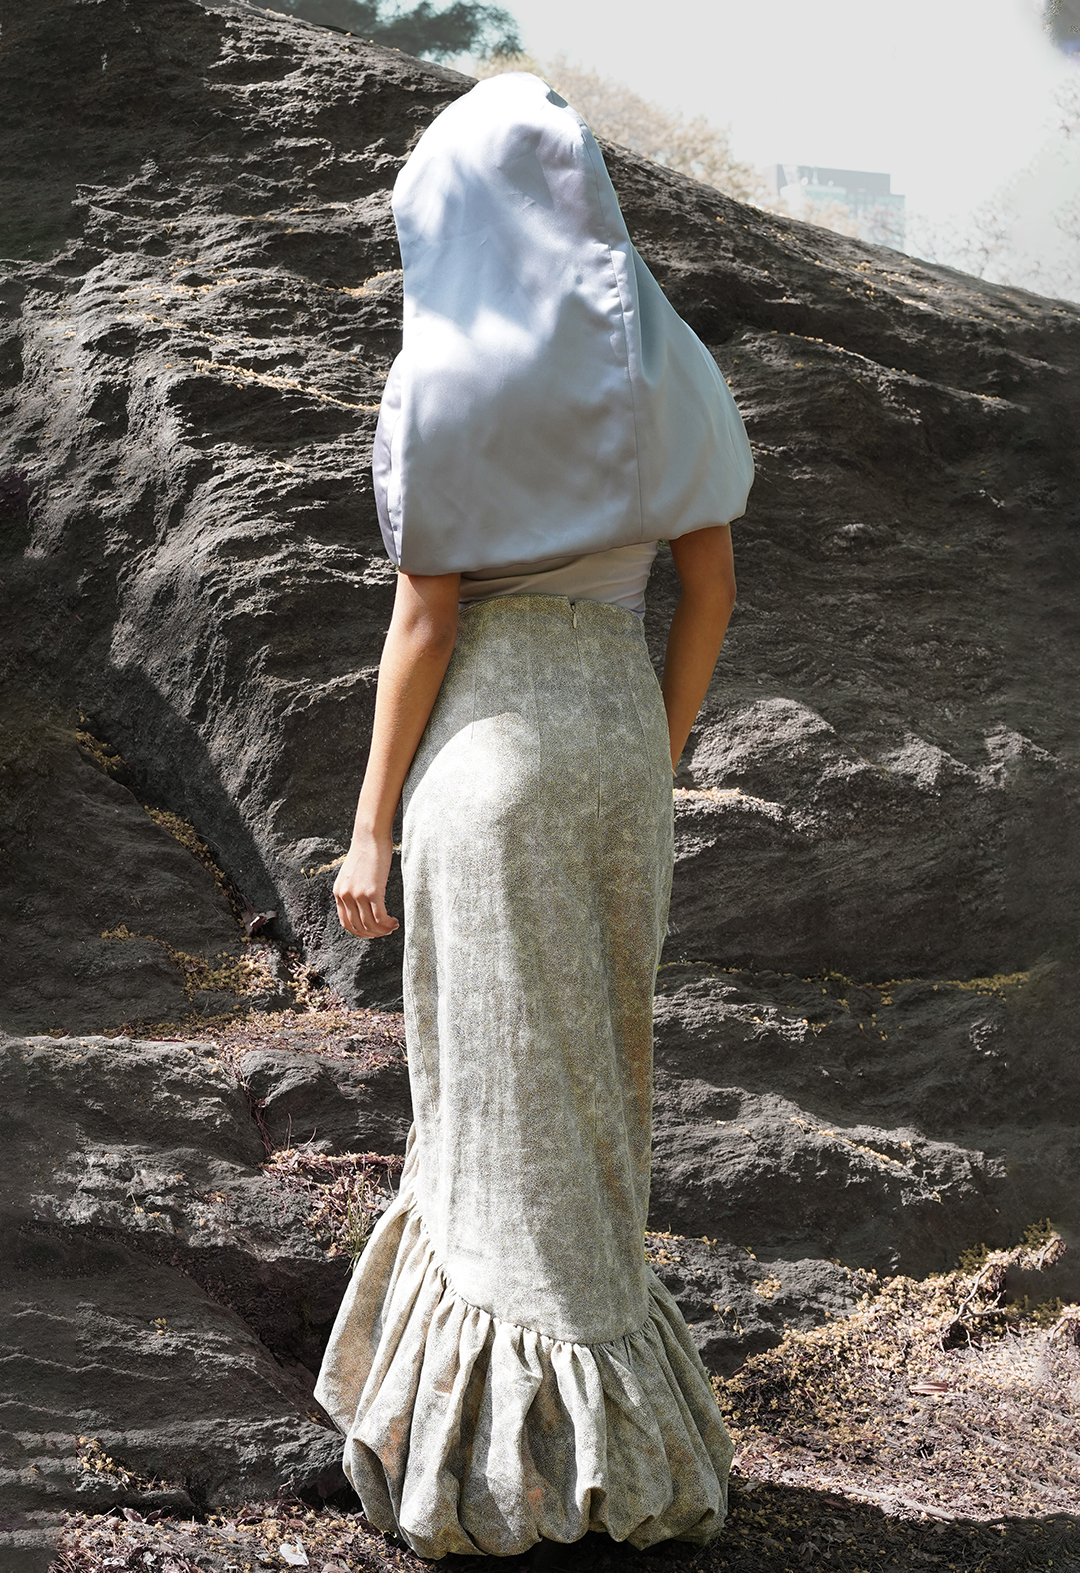 Back view of a model wearing a curved bubble skirt and a hooded capelet. There is a big rock in the background.